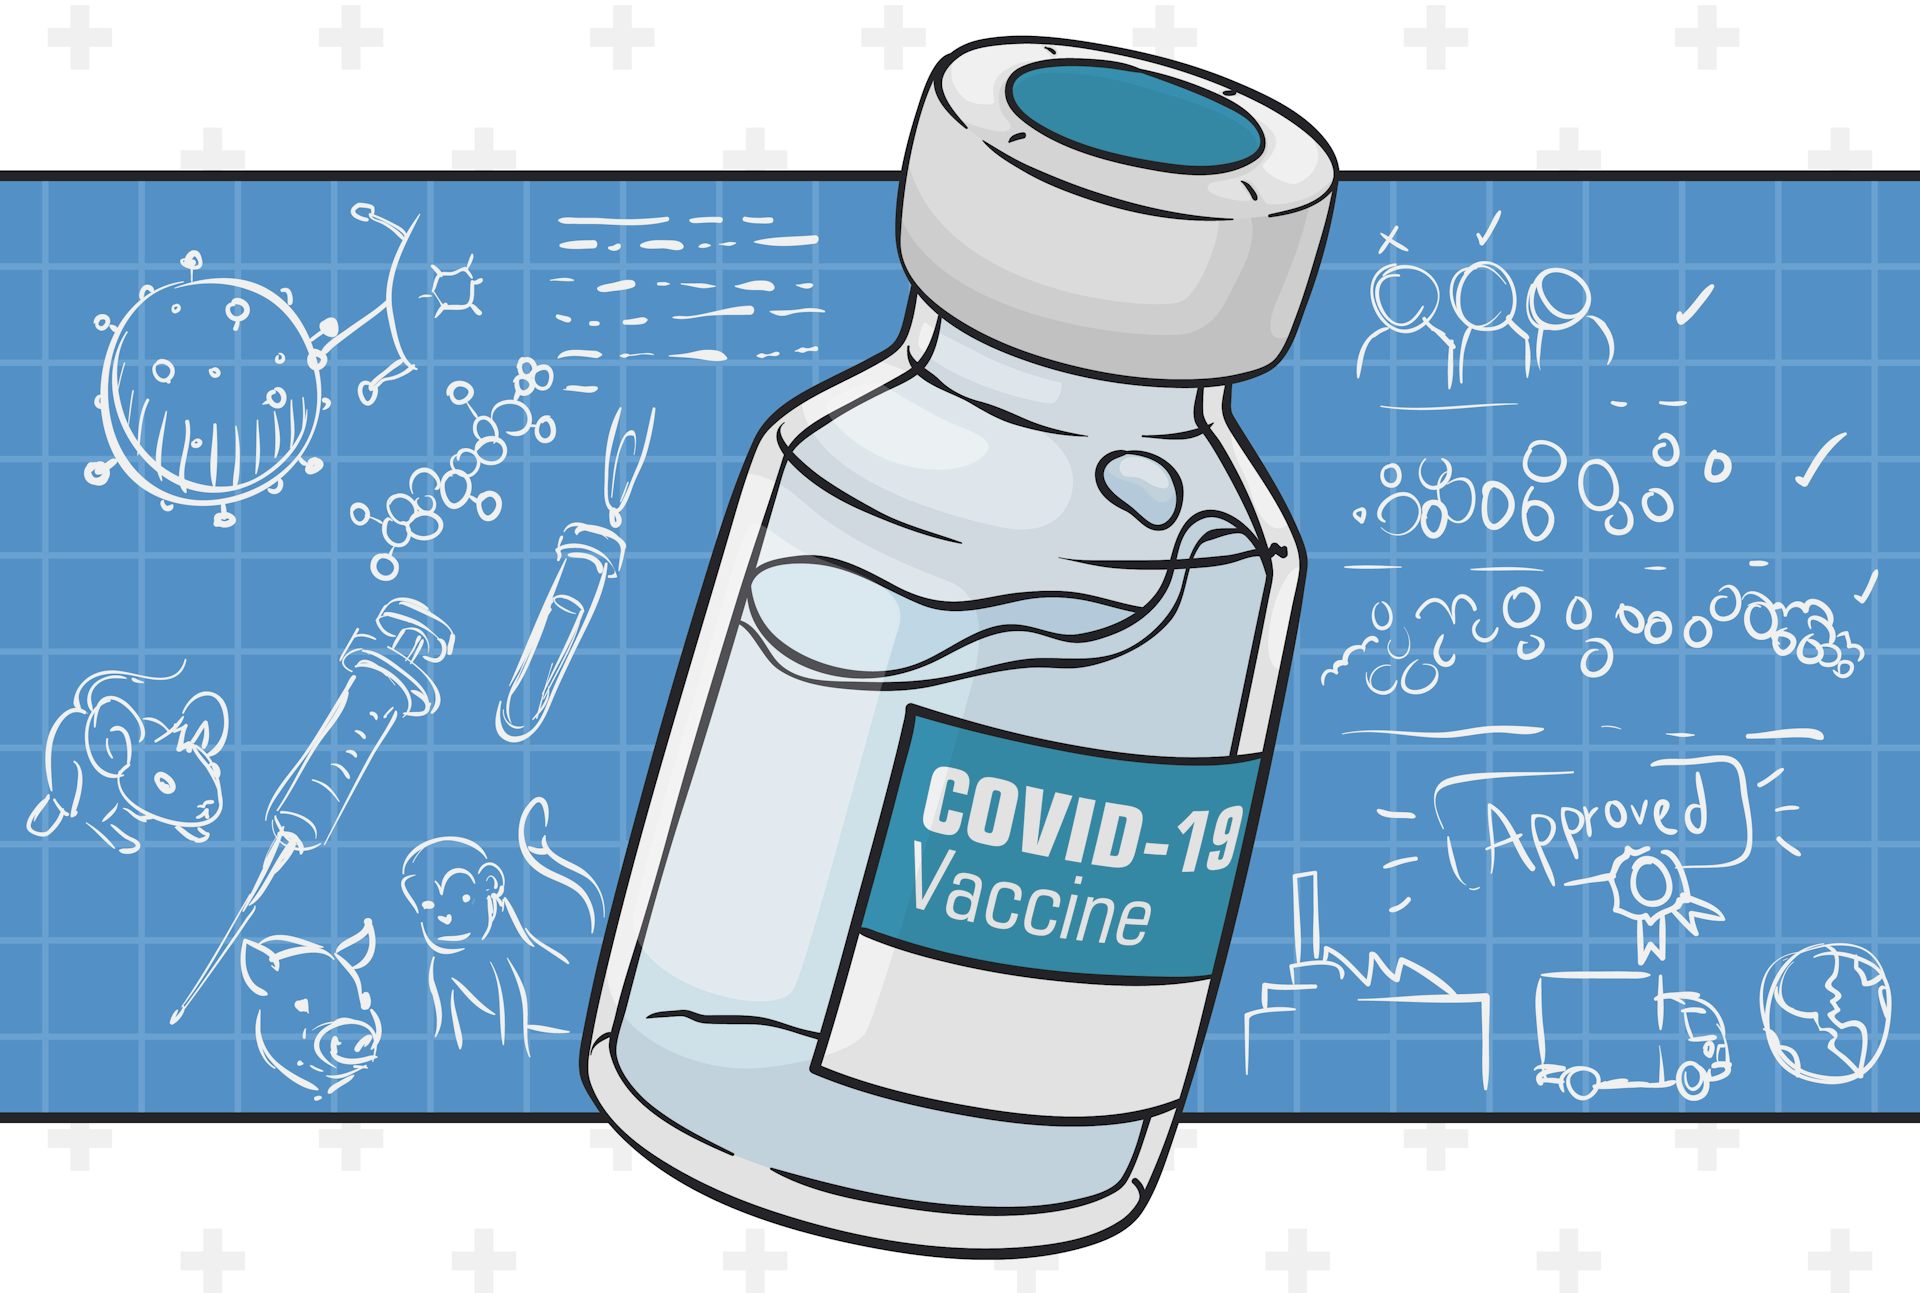 New Covid-19 Vaccine Warnings Don’t Mean It’s Unsafe – They Mean the System to Report Side Effects Is Working